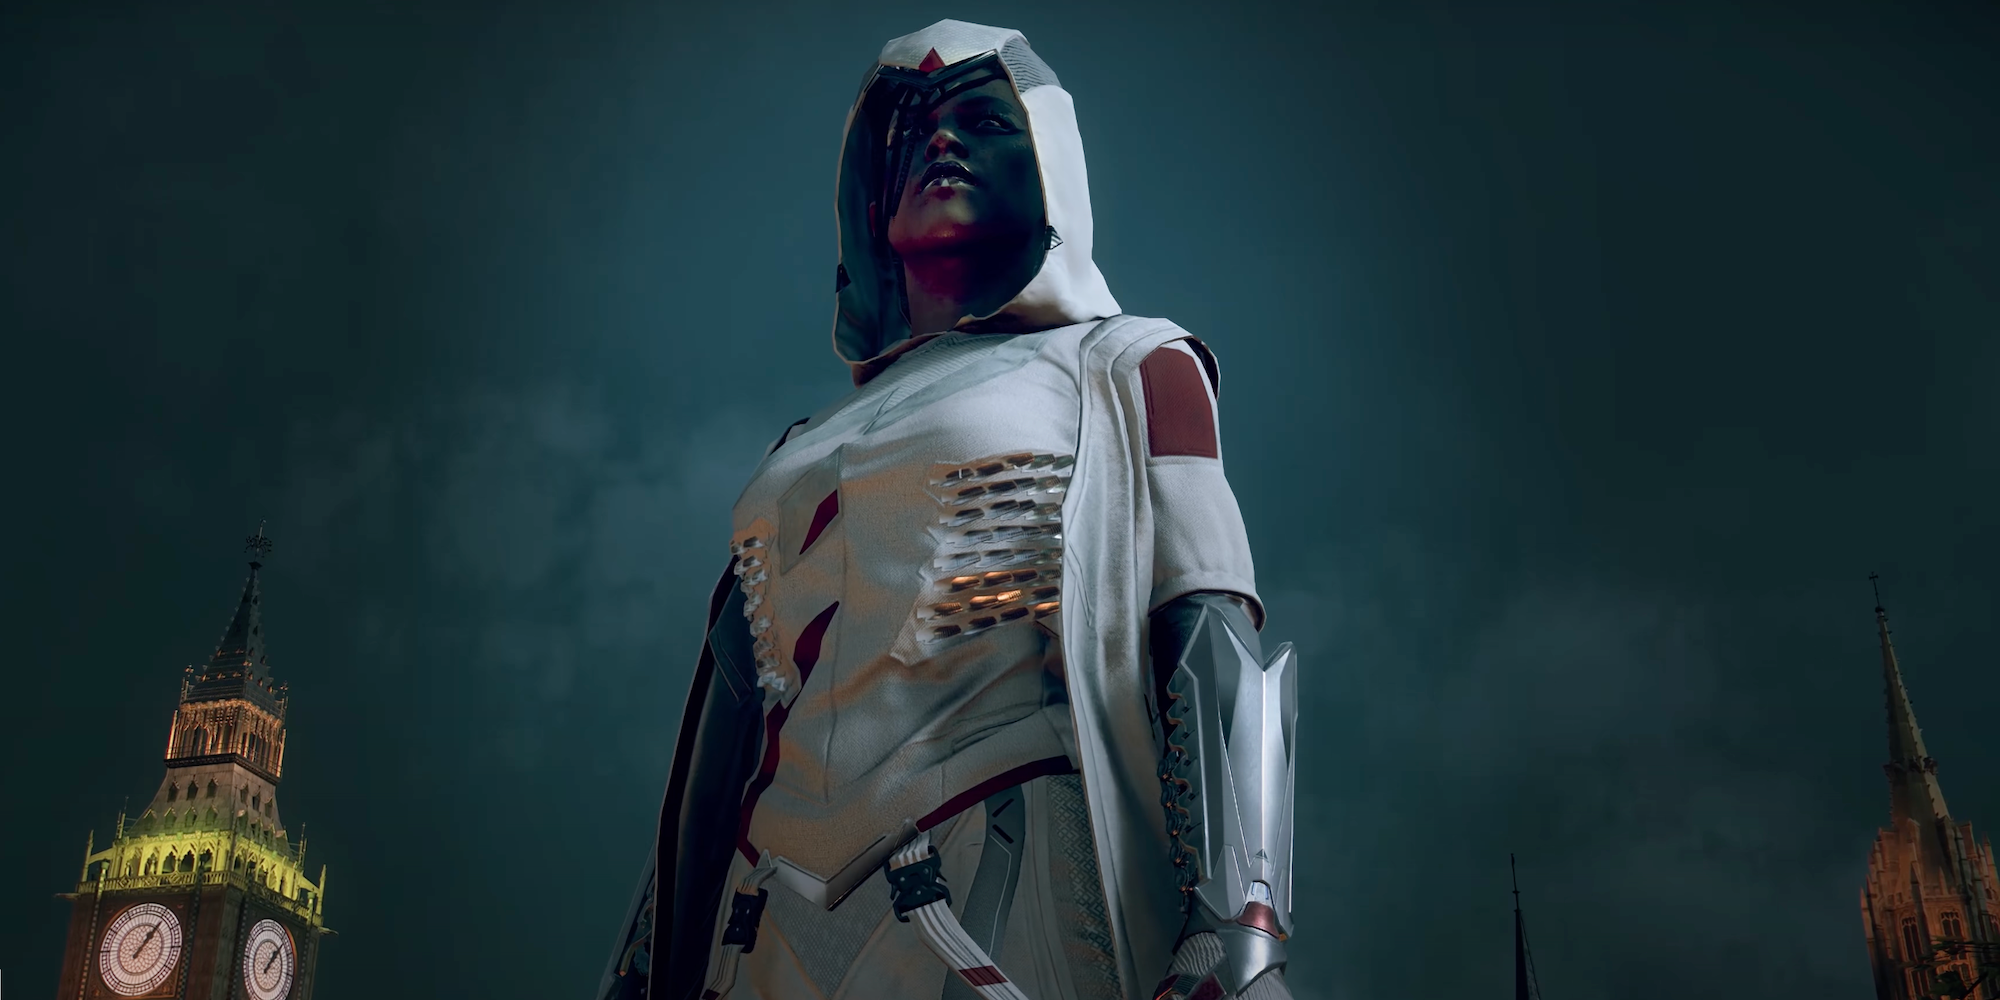 Watch Dogs: Legion Is Adding a Playable Assassin's Creed Character